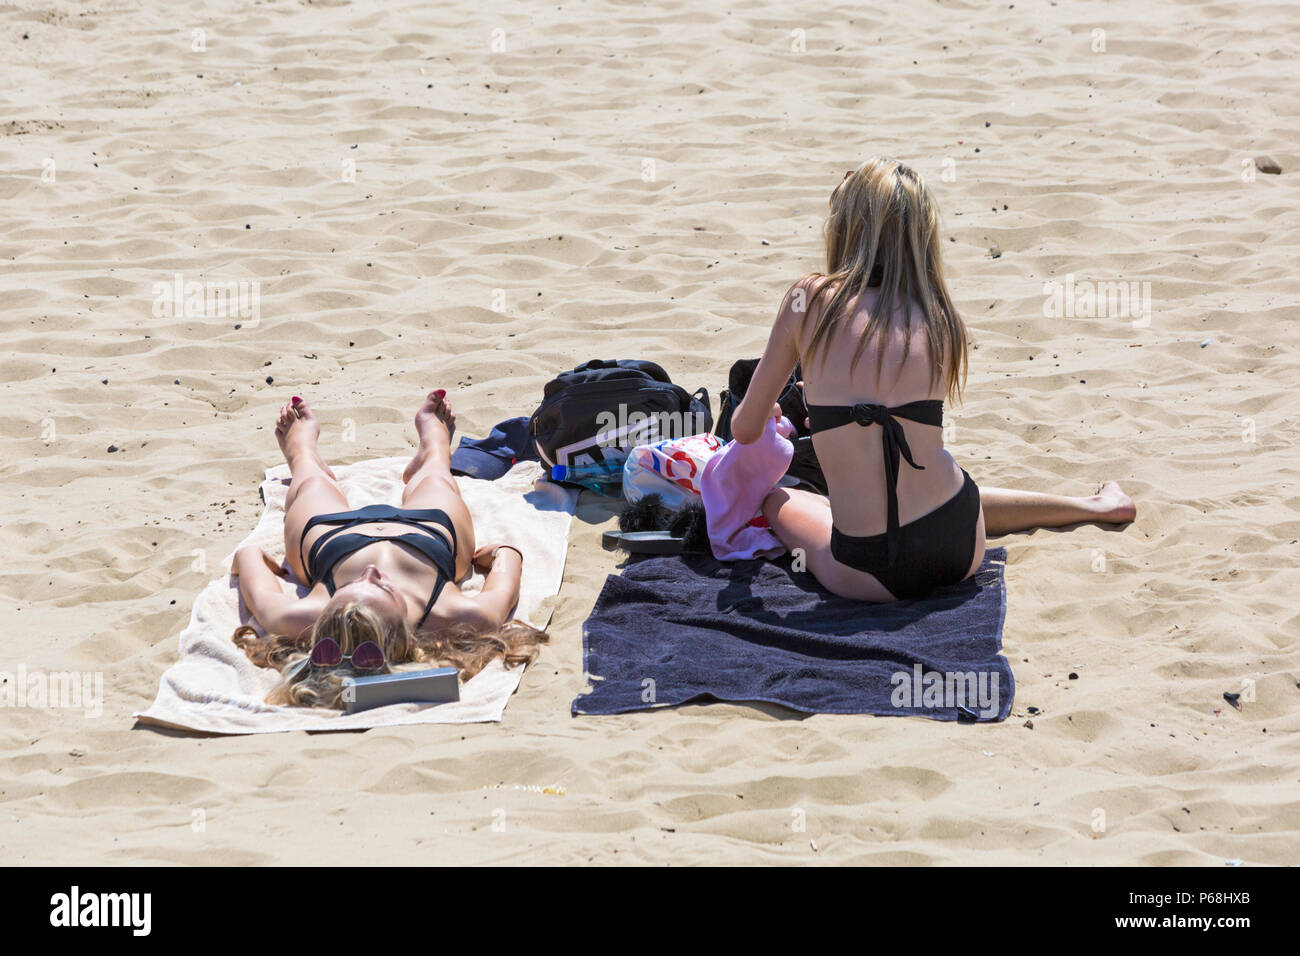 Bournemouth, Dorset, UK. 29th June, 2018. UK weather: sunseekers head to the beaches at Bournemouth on another hot sunny day with unbroken blue skies and sunshine. A slight breeze makes the heat more bearable. sunbathers on the beach. Credit: Carolyn Jenkins/Alamy Live News Stock Photo